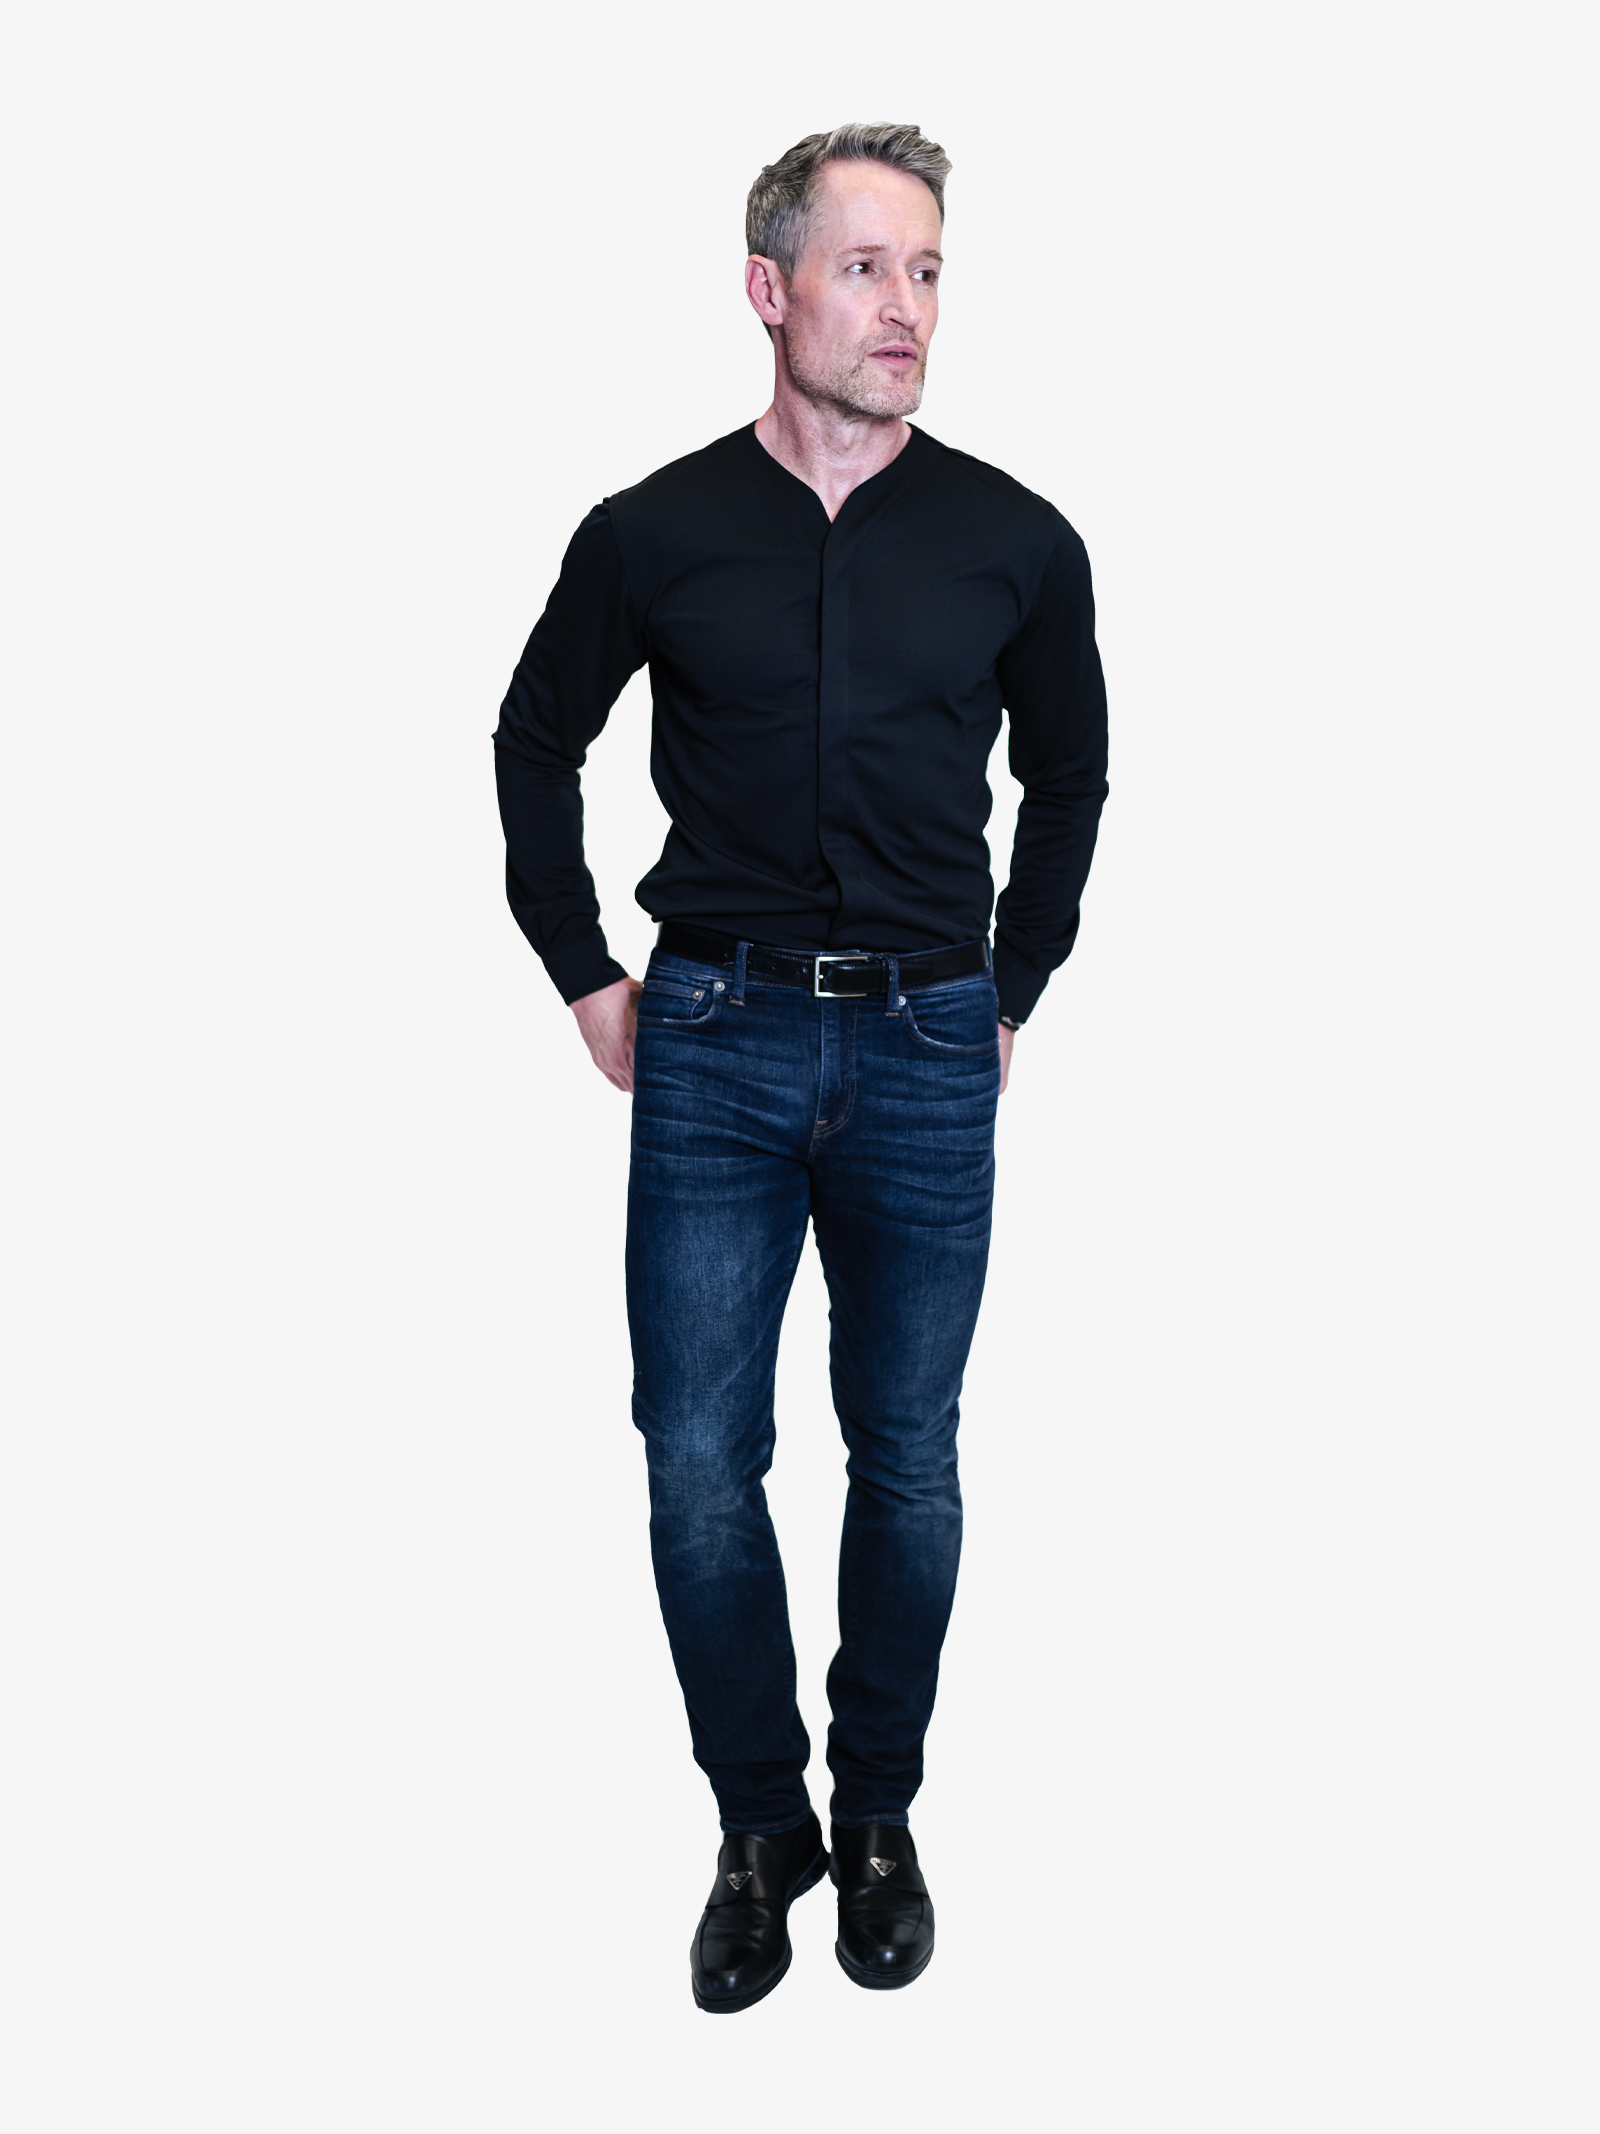 black dress shirt with jeans